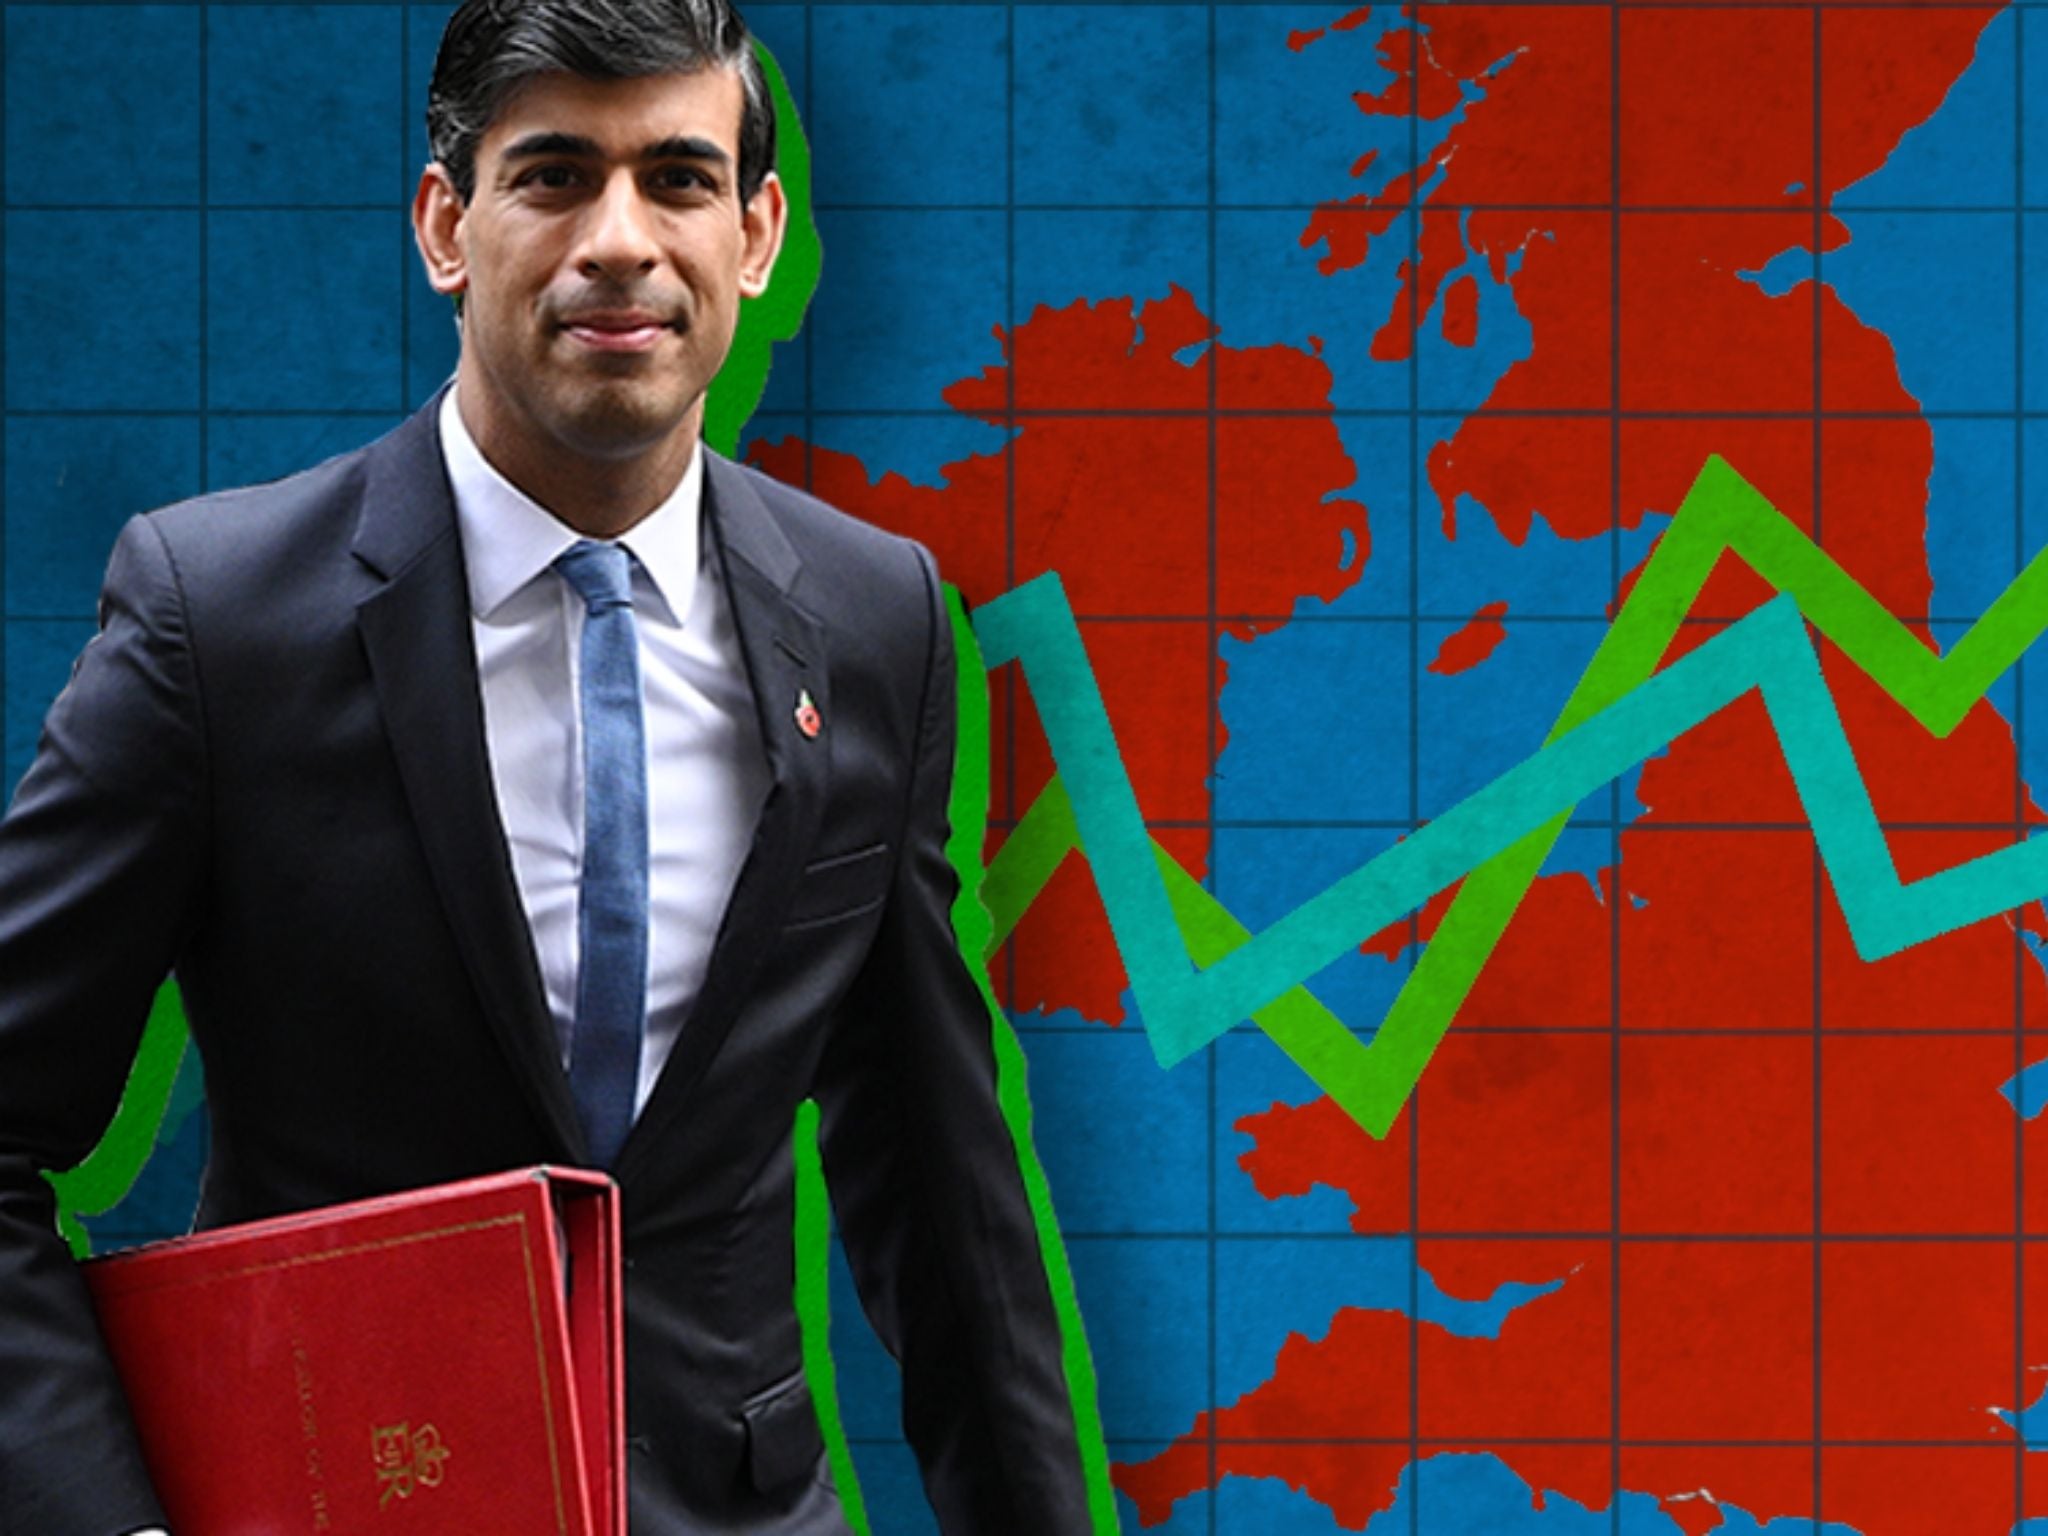 Rishi Sunak is preparing to unveil the most consequential budget in years